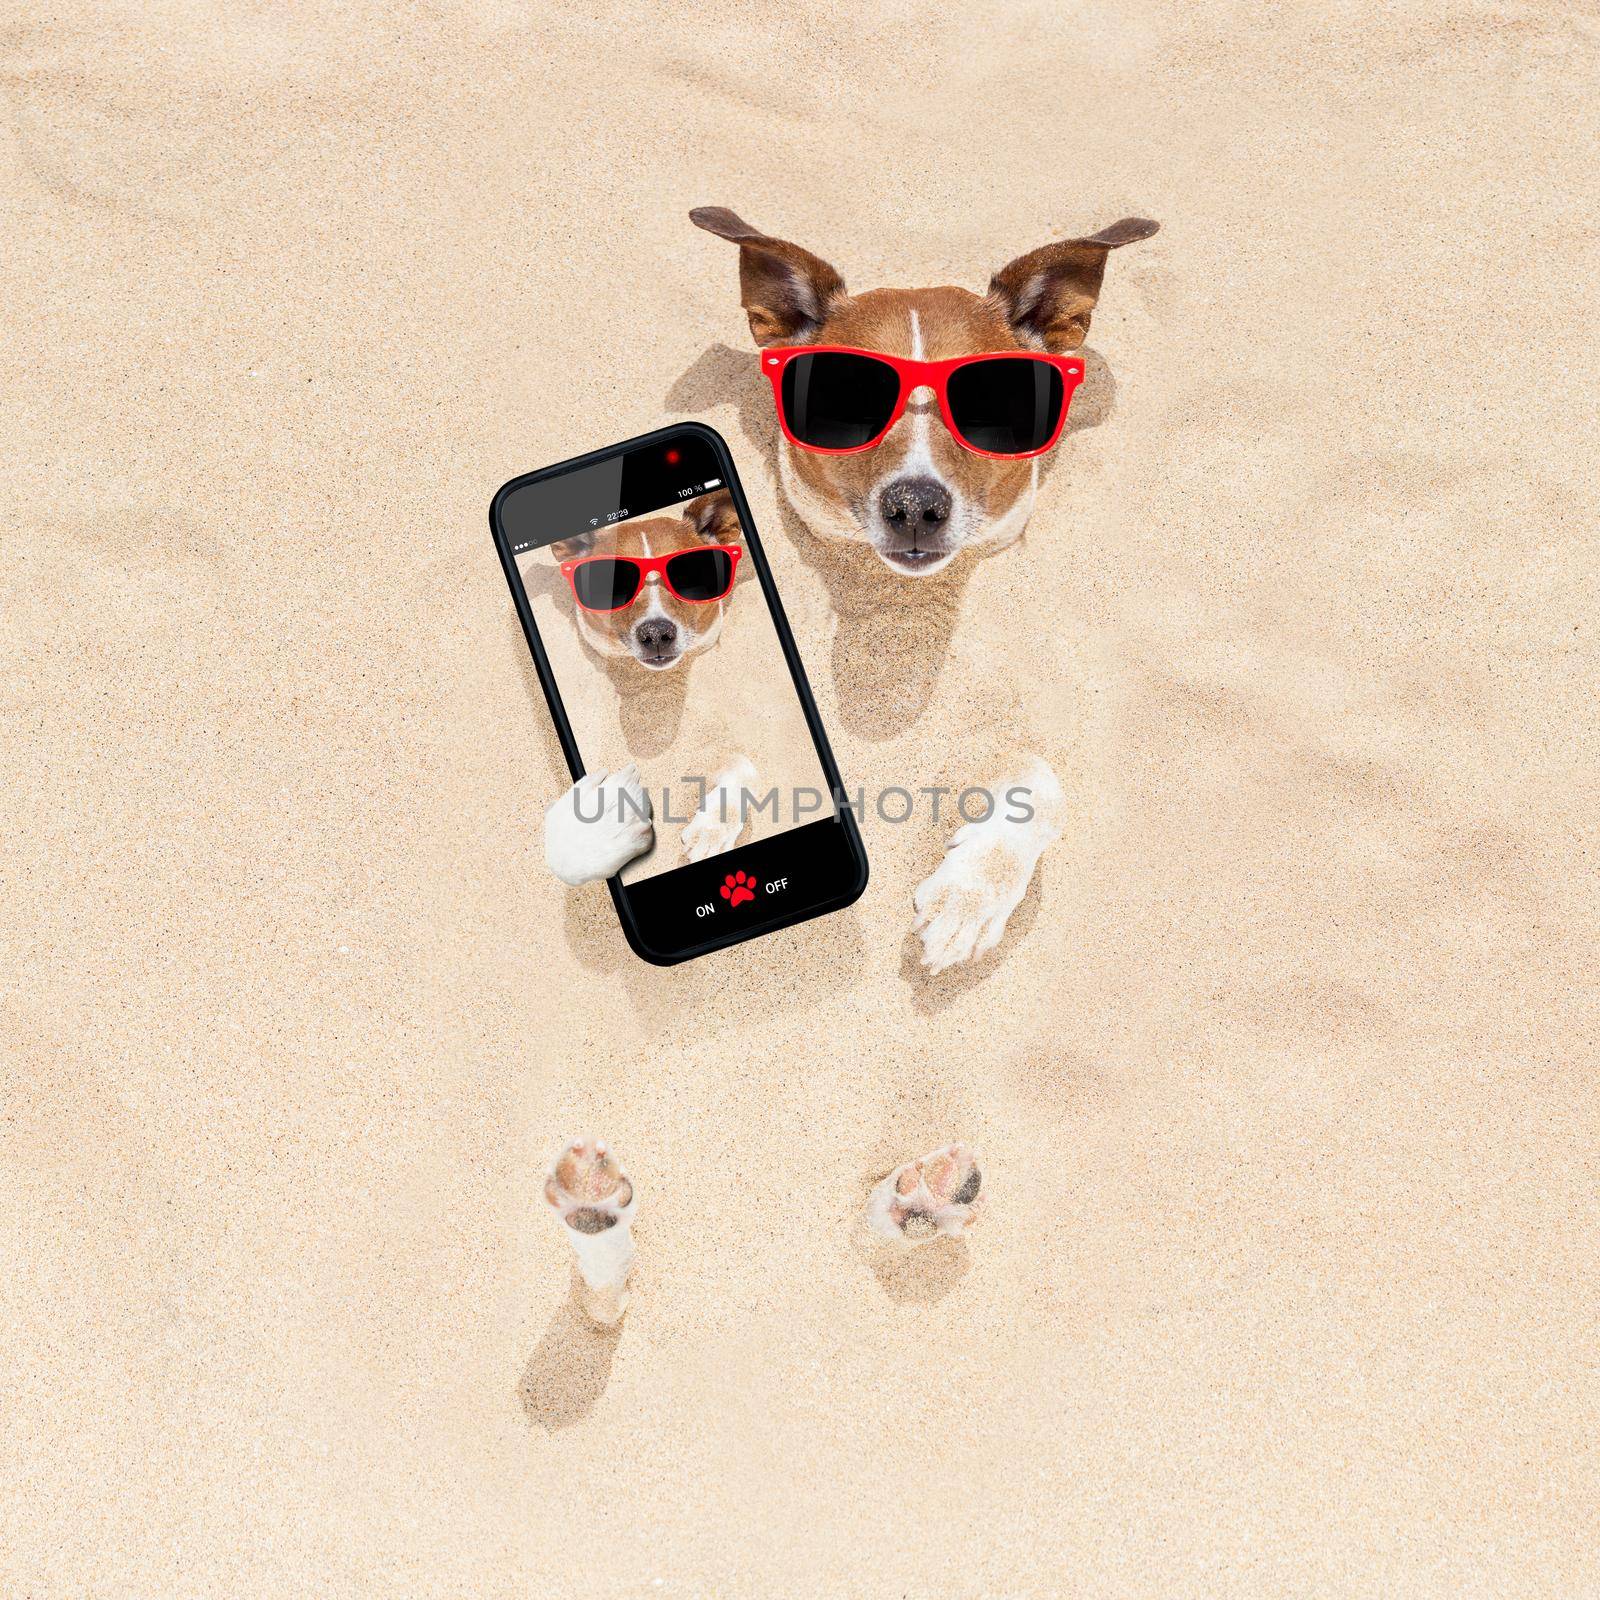 jack russell dog  buried in the sand at the beach on summer vacation holidays , taking a selfie, wearing red sunglasses